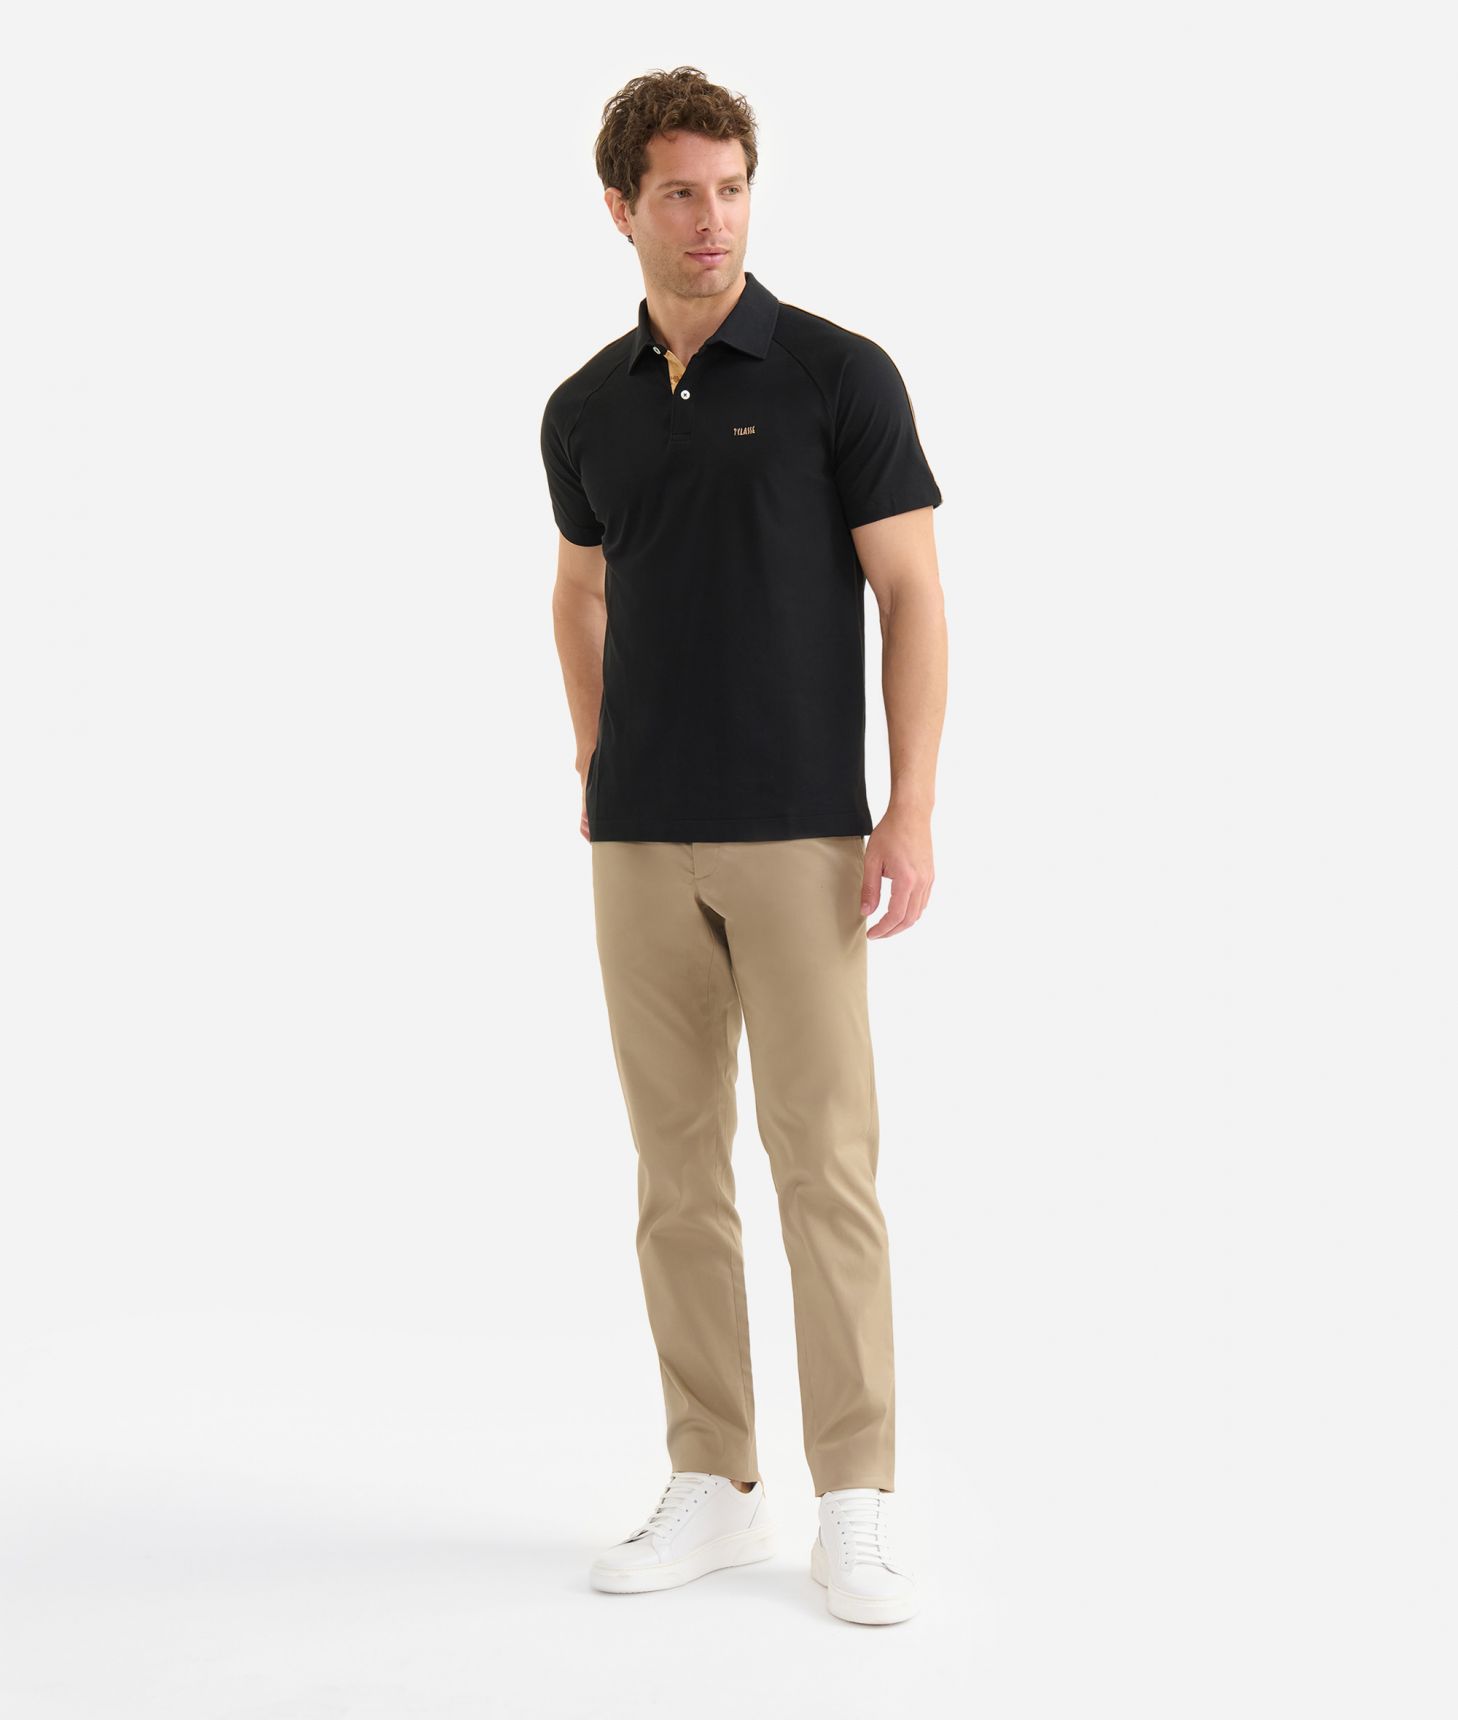 Piqué cotton jersey polo shirt with sleeve detail Black,front